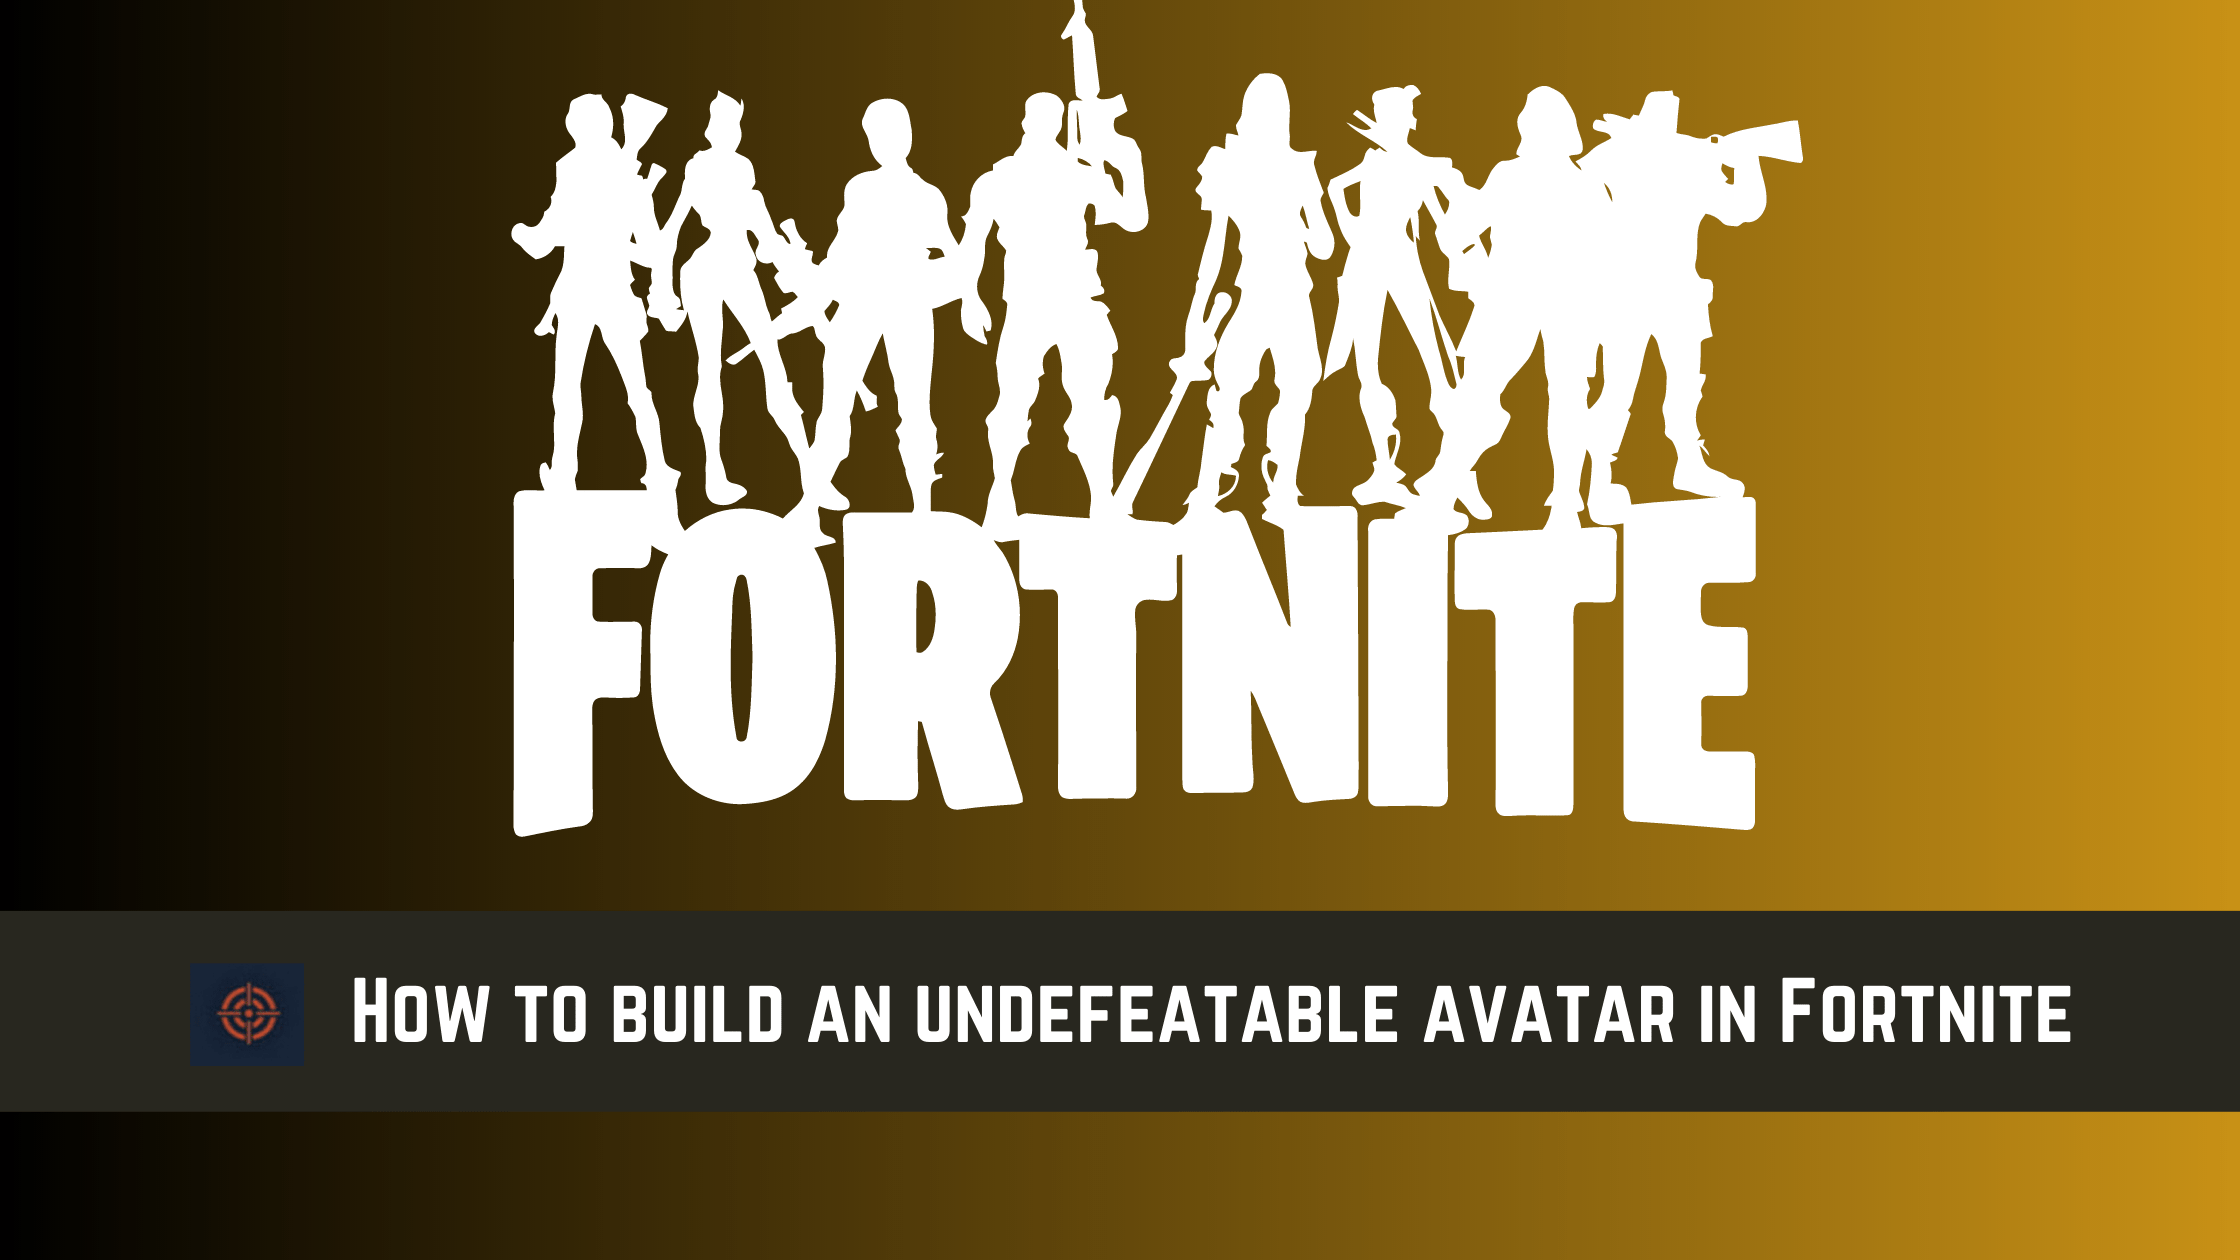 How to build an undefeatable avatar in Fortnite